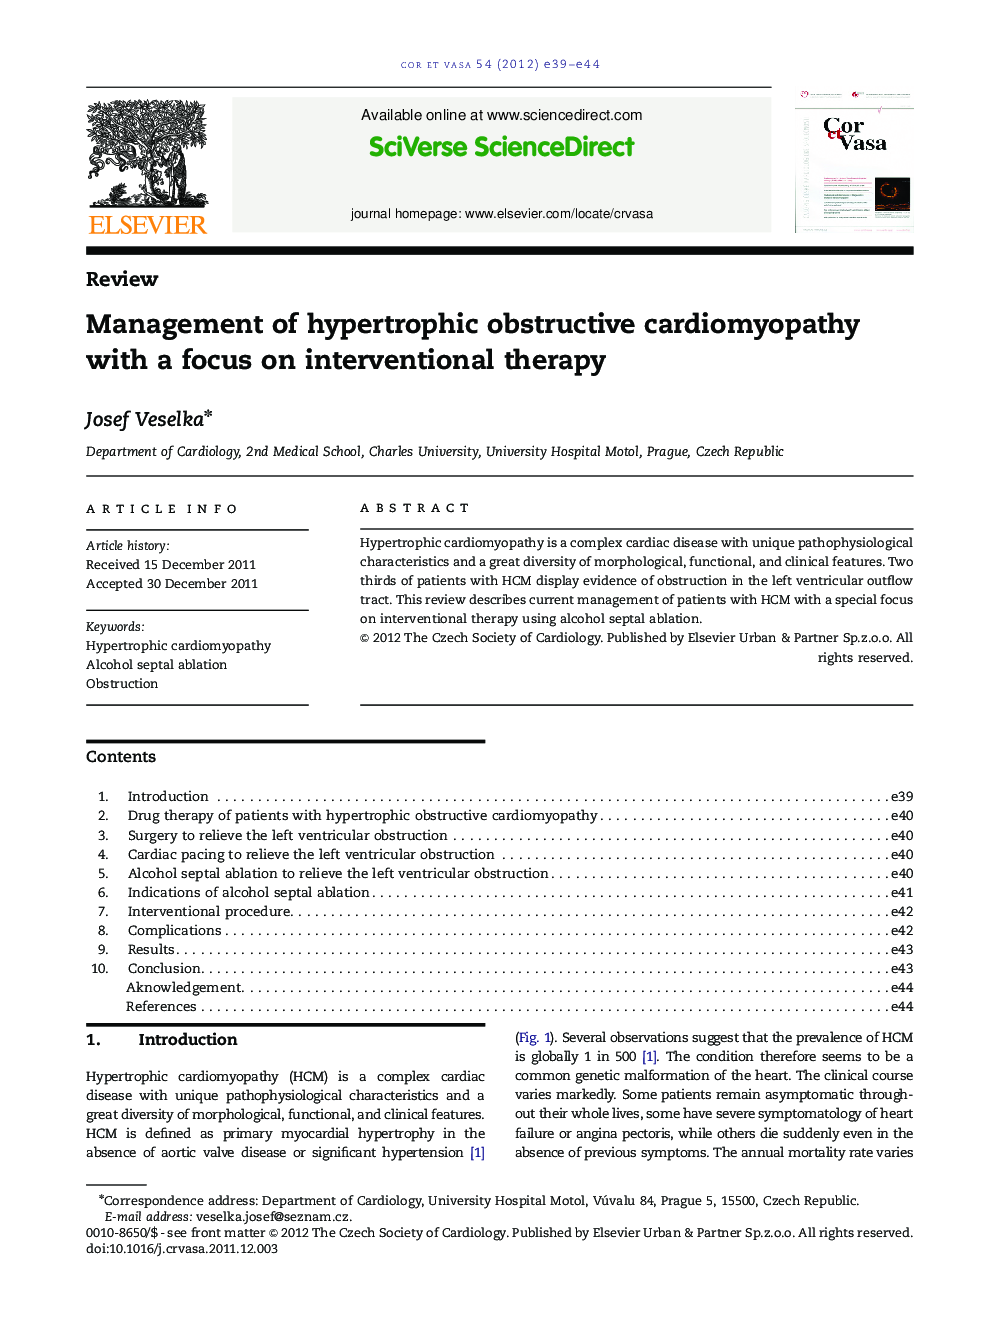 Management of hypertrophic obstructive cardiomyopathy with a focus on interventional therapy